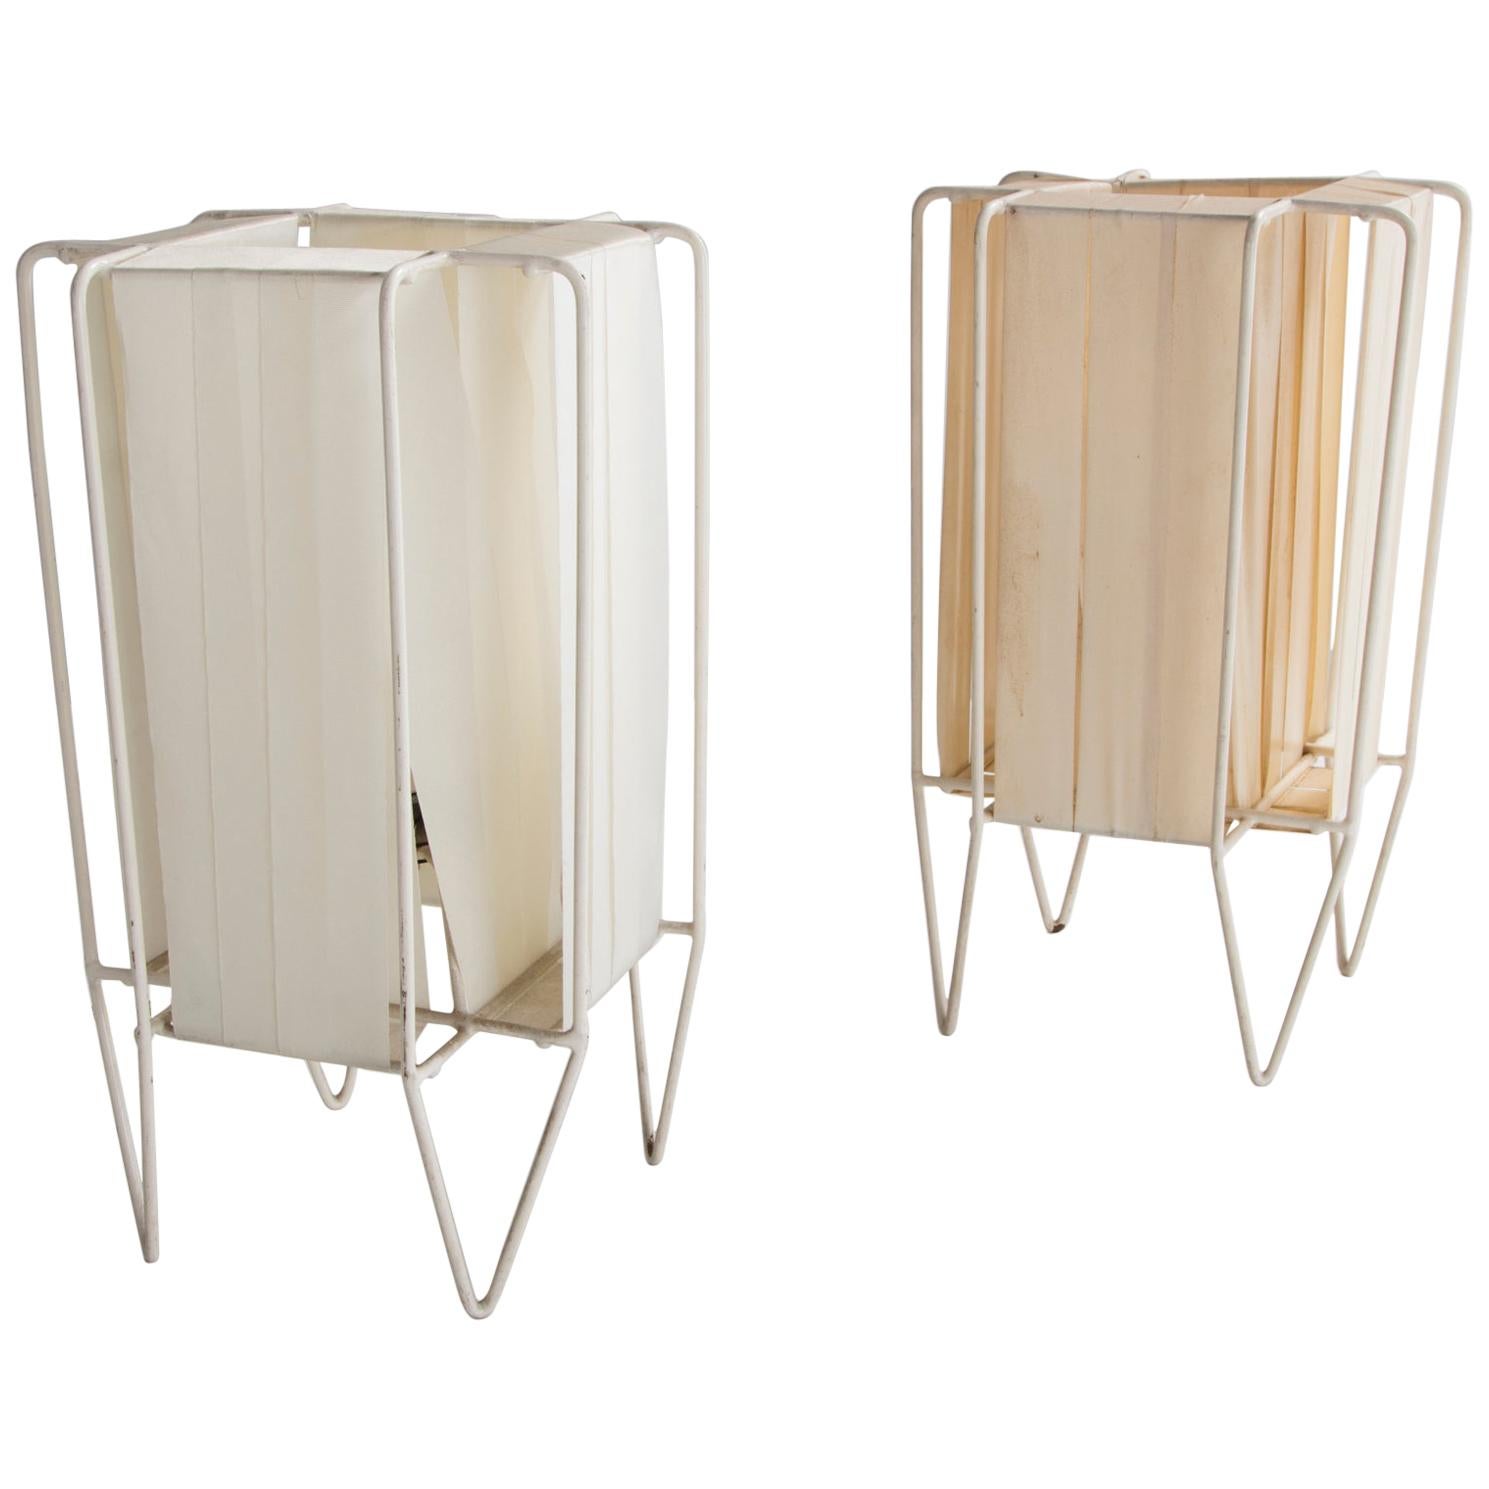 Pair of "Kite" Table Lamps with Metal Frames and Woven Shades, circa 1960s